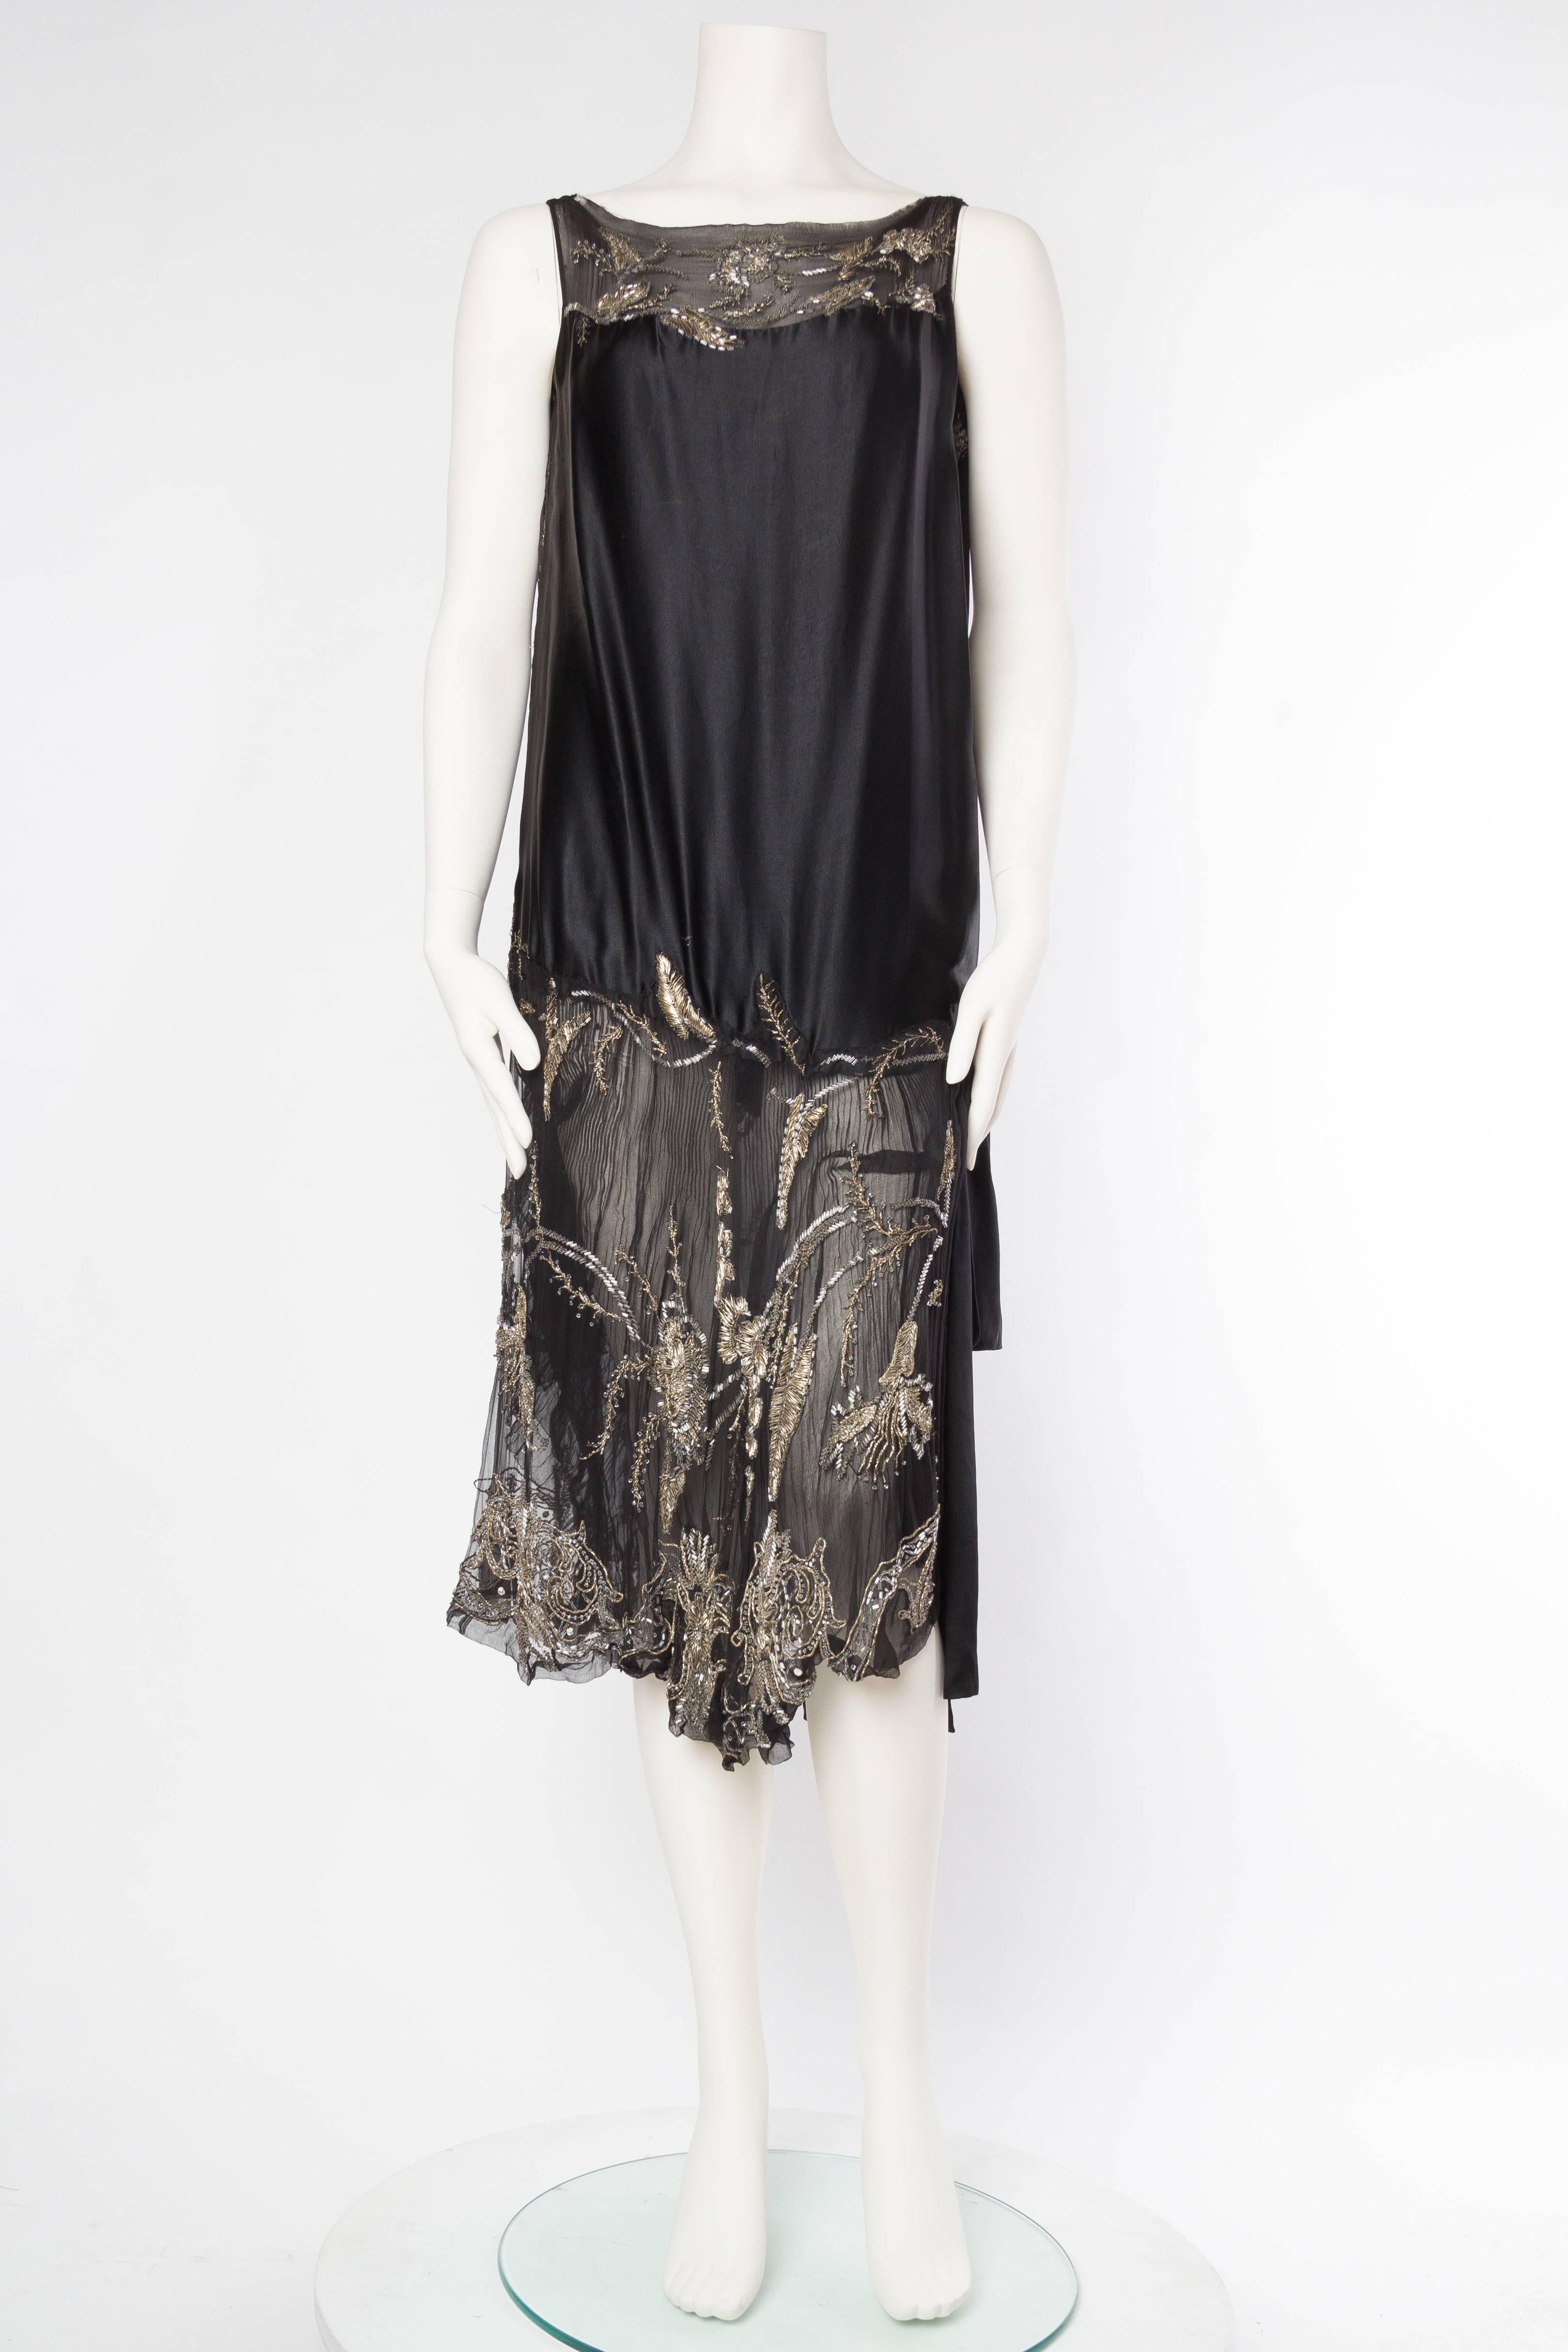 1920S Black Silk Chiffon & Charmeuse Cocktail Dress With Floral Metallic Lame Embroidery Beading